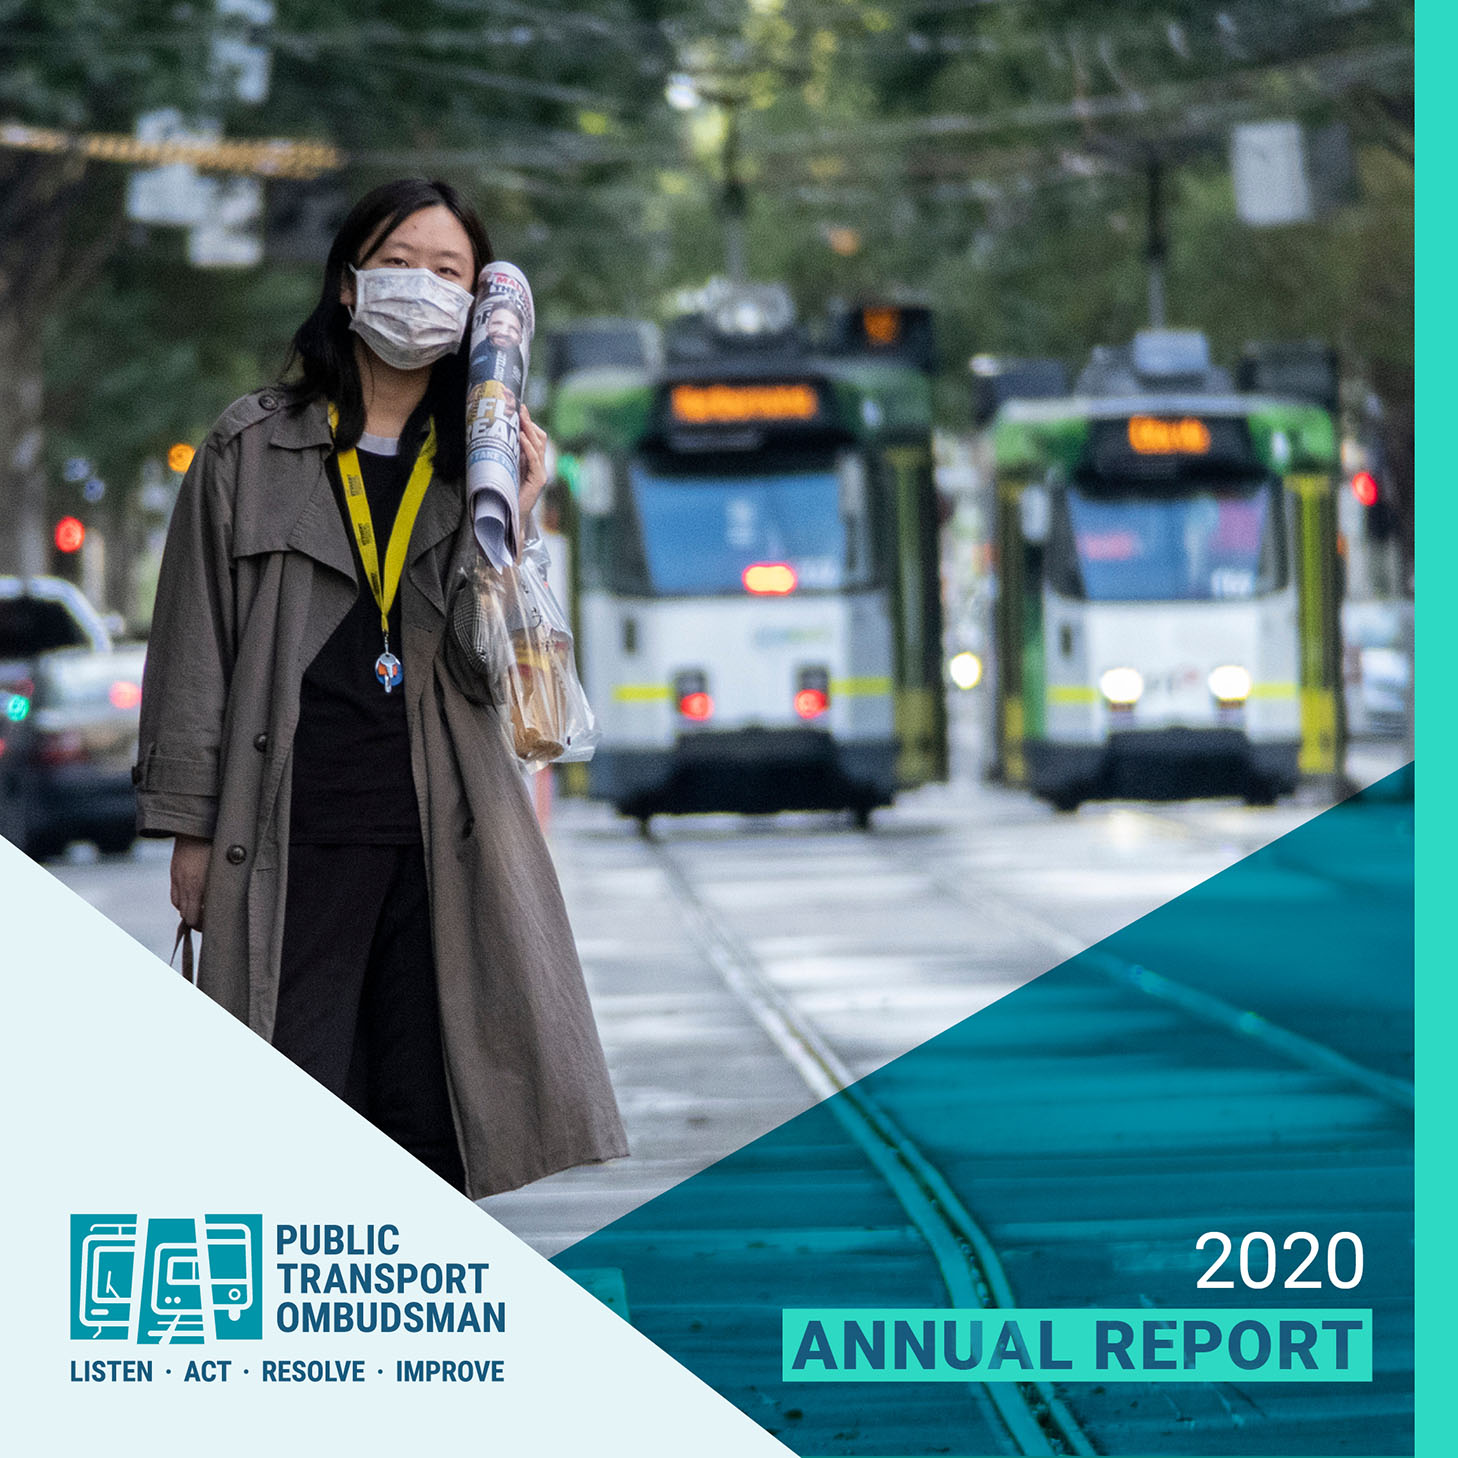 The PTO's 2020 Annual Report cover is an image of a person wearing a facemask while waiting for a tram during the COVID-19 pandemic. There are two blurred trams in the background.